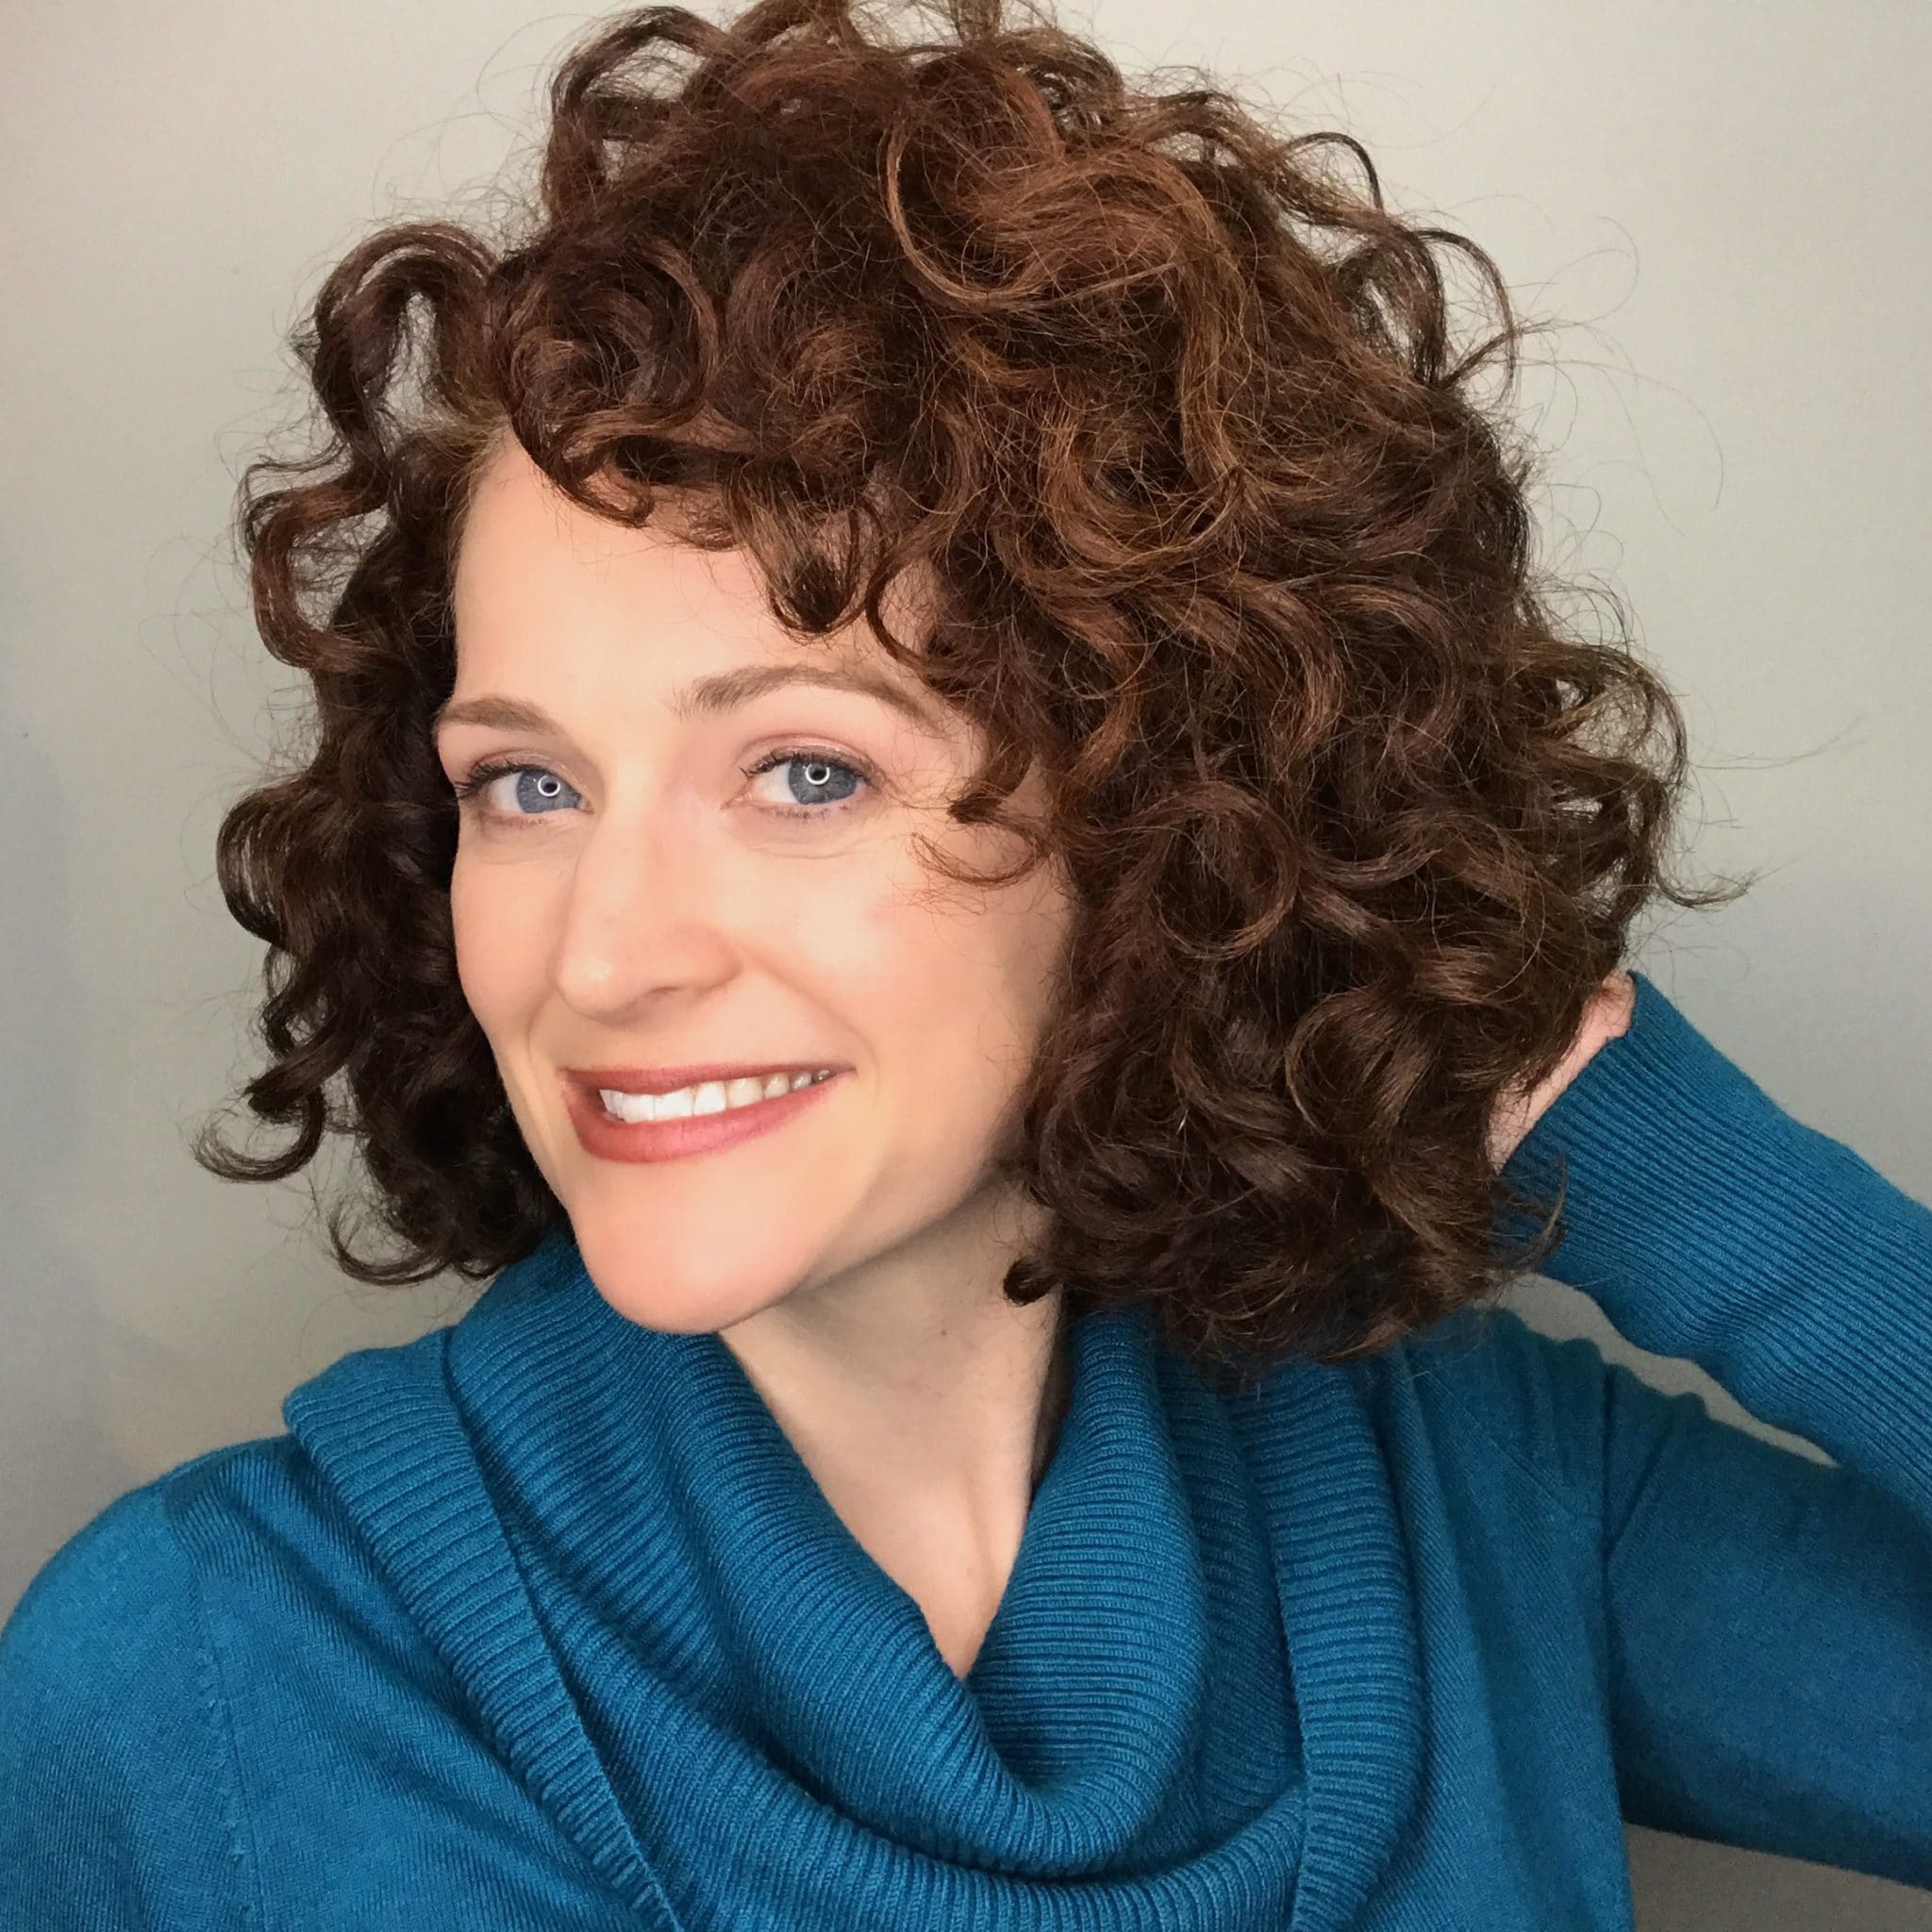 Posts on how to have gorgeous curls